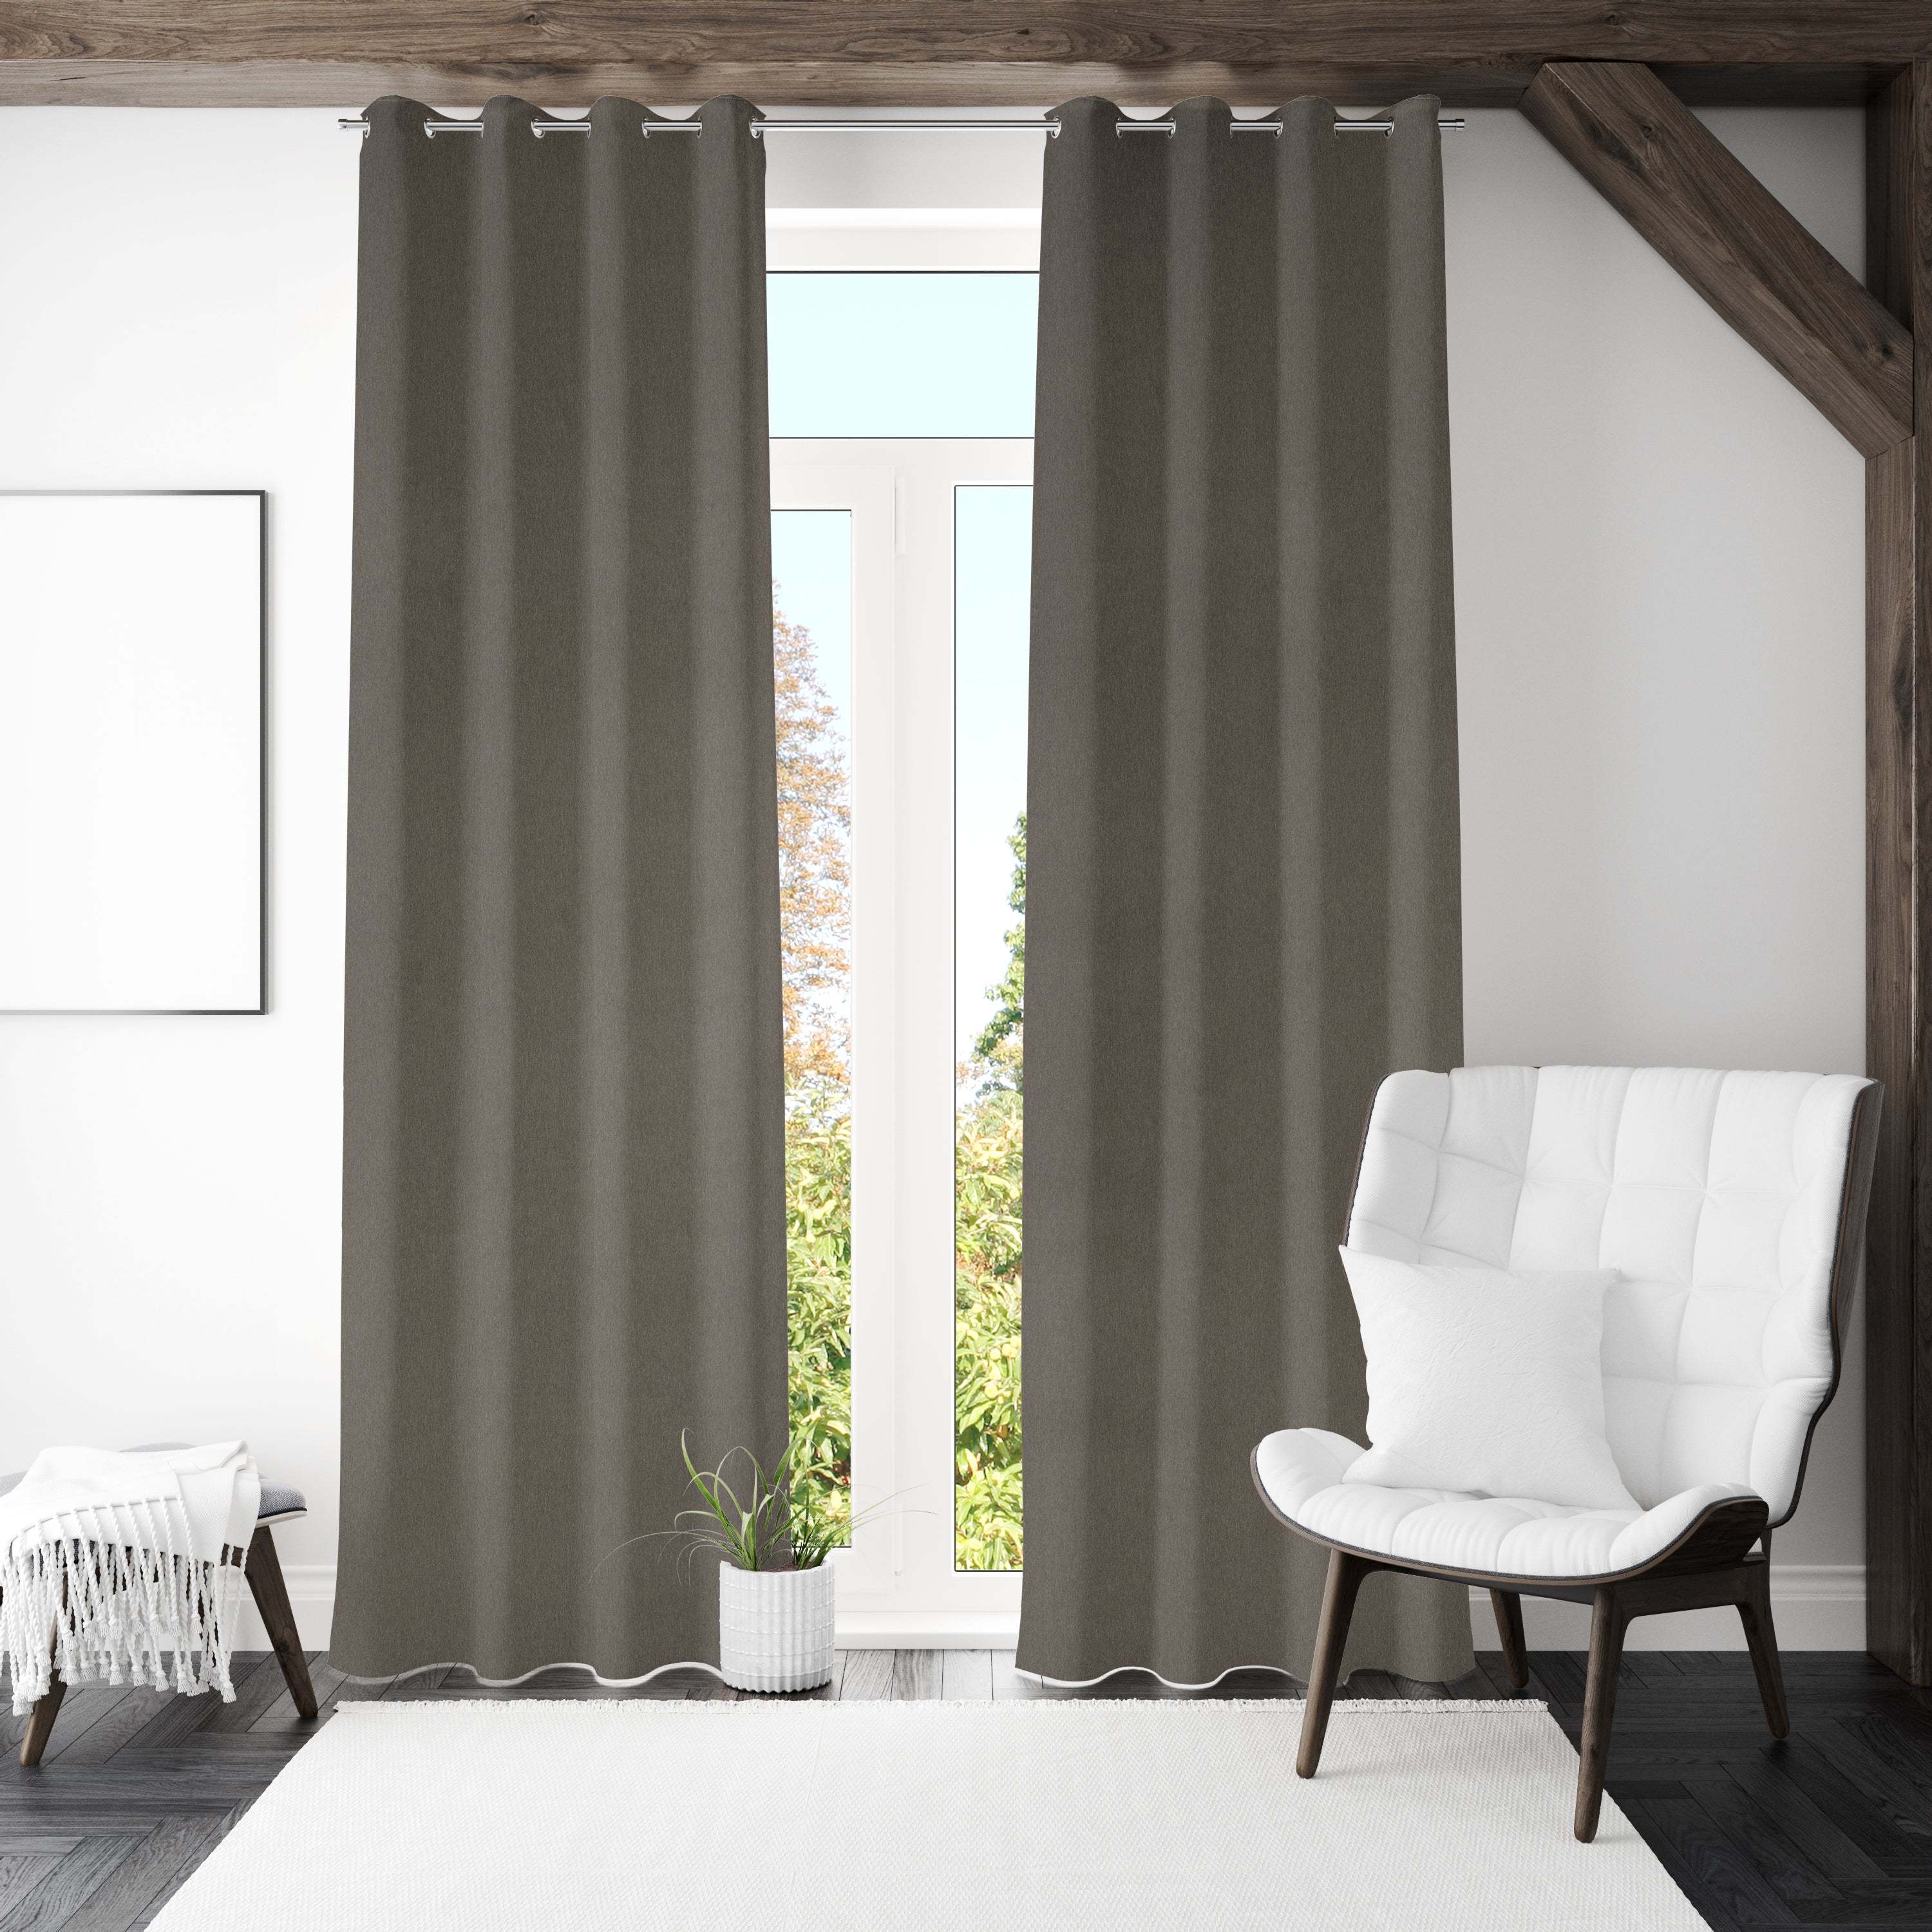 Visto Solid Blackout 7 Ft Polyester Door Curtains Set of 2 (Brown)